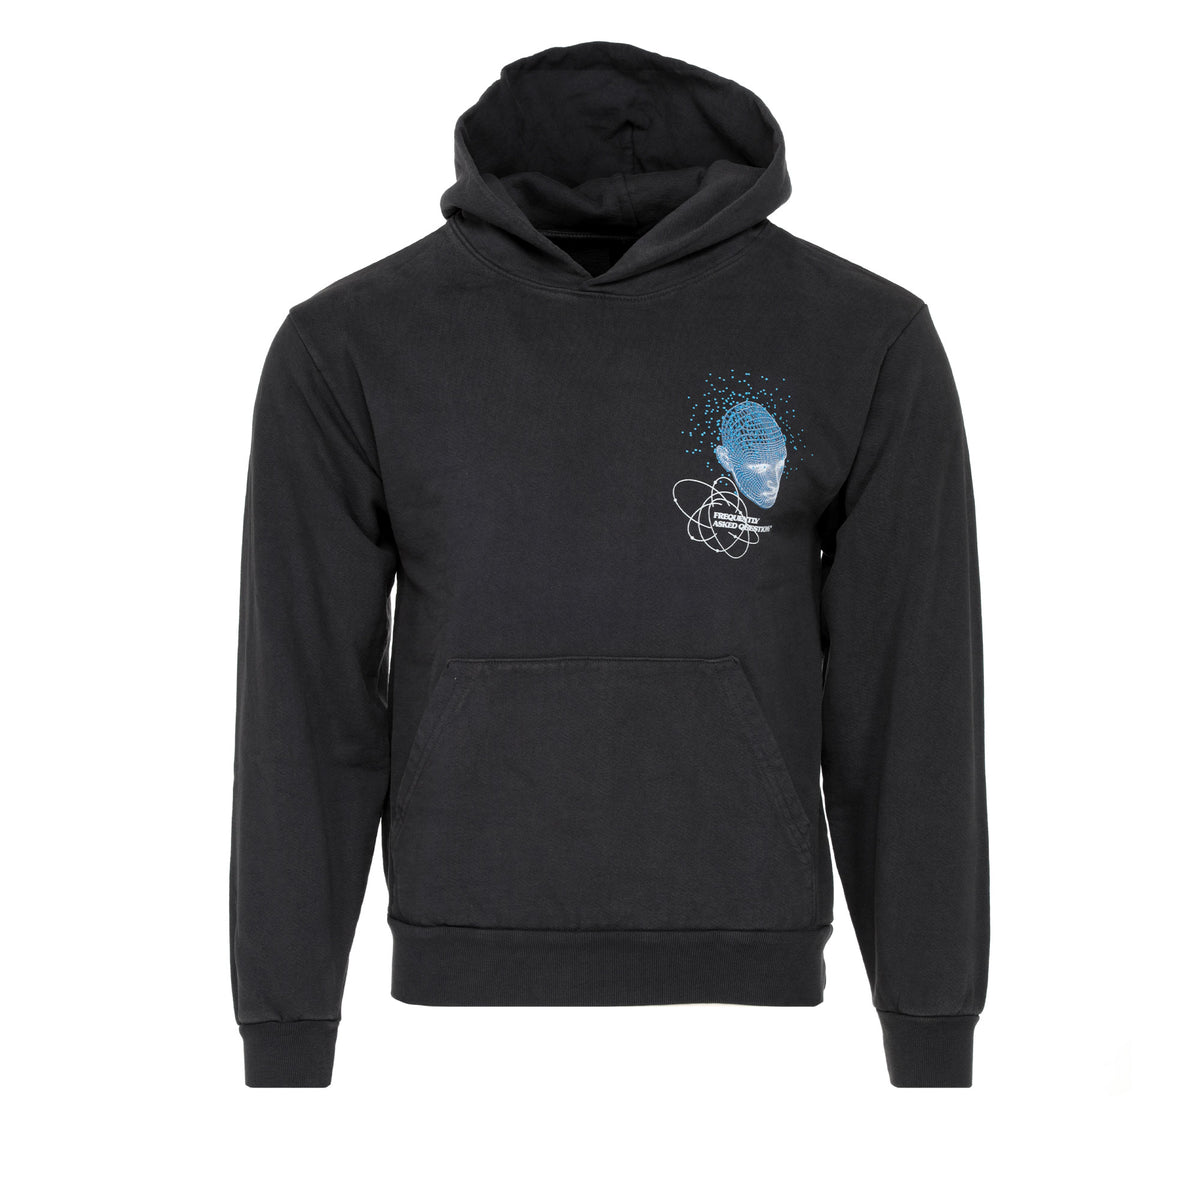 FAQ Clothing "Wisdom" Men's Pullover Hoodie - SIZE Boutique